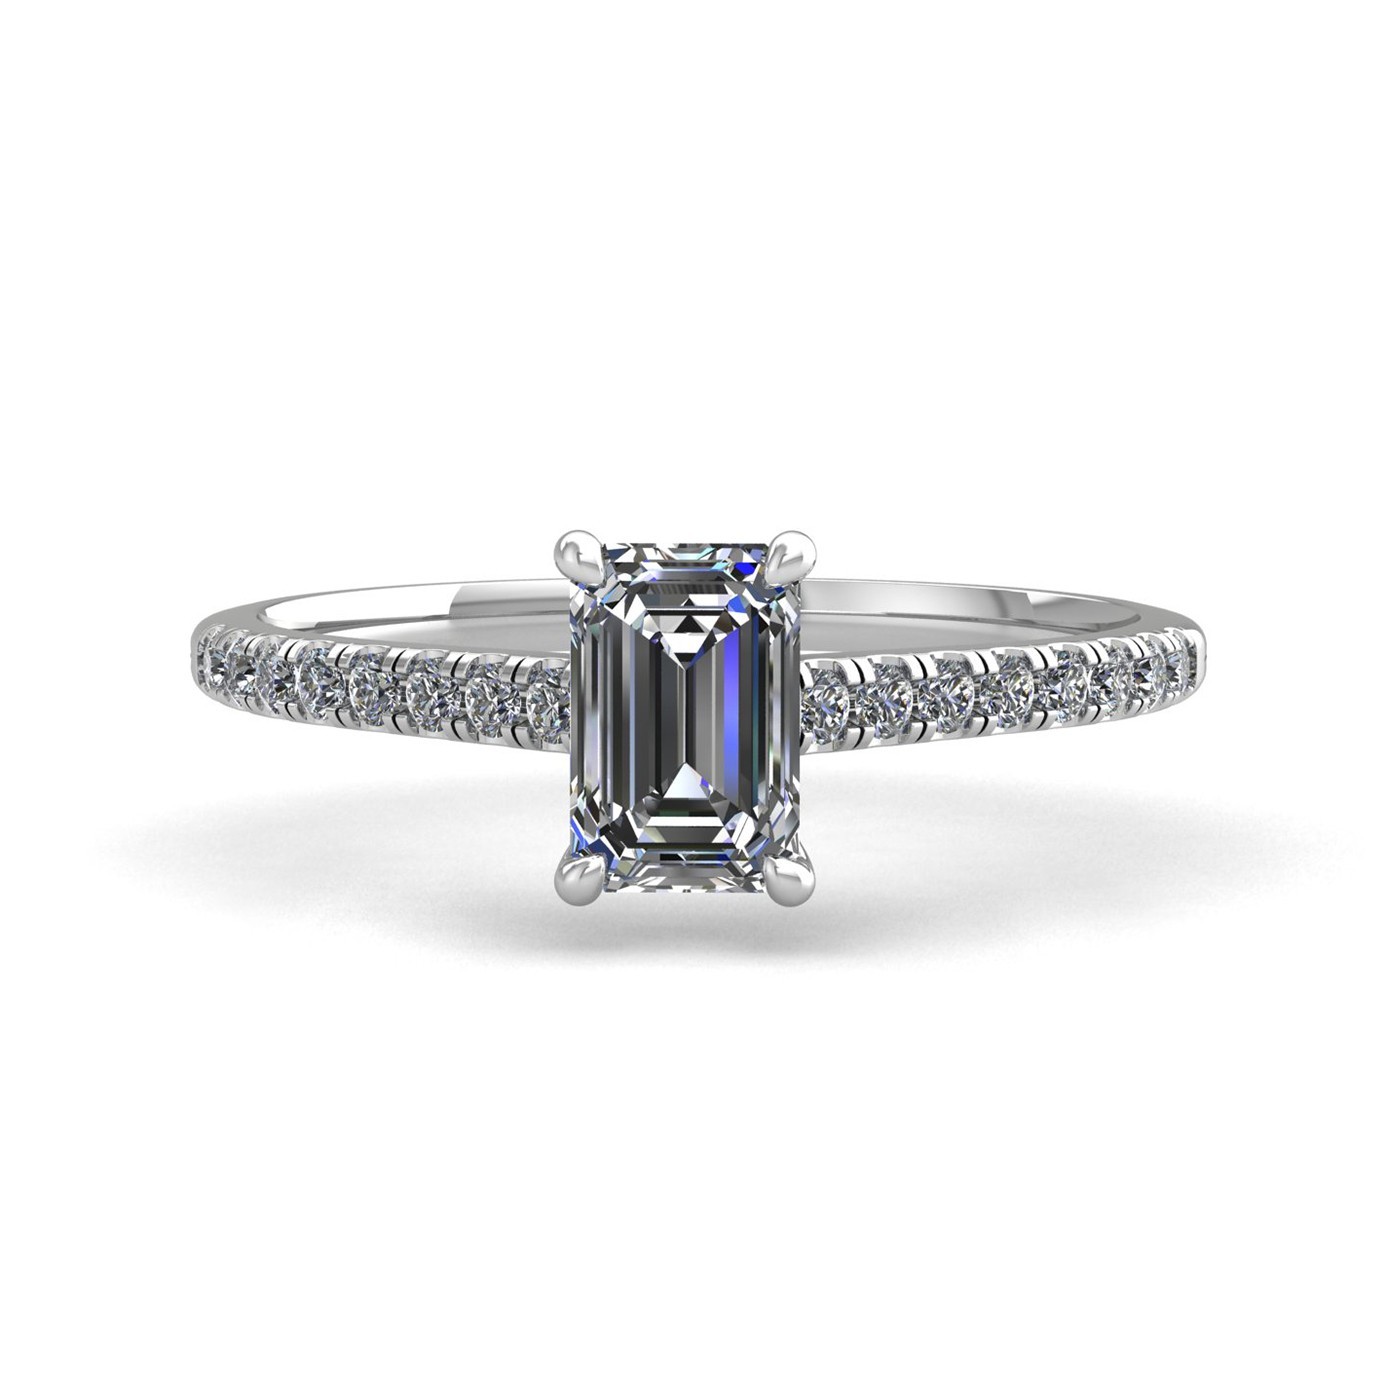 18k white gold  0,50 ct 4 prongs emerald cut diamond engagement ring with whisper thin pavÉ set band